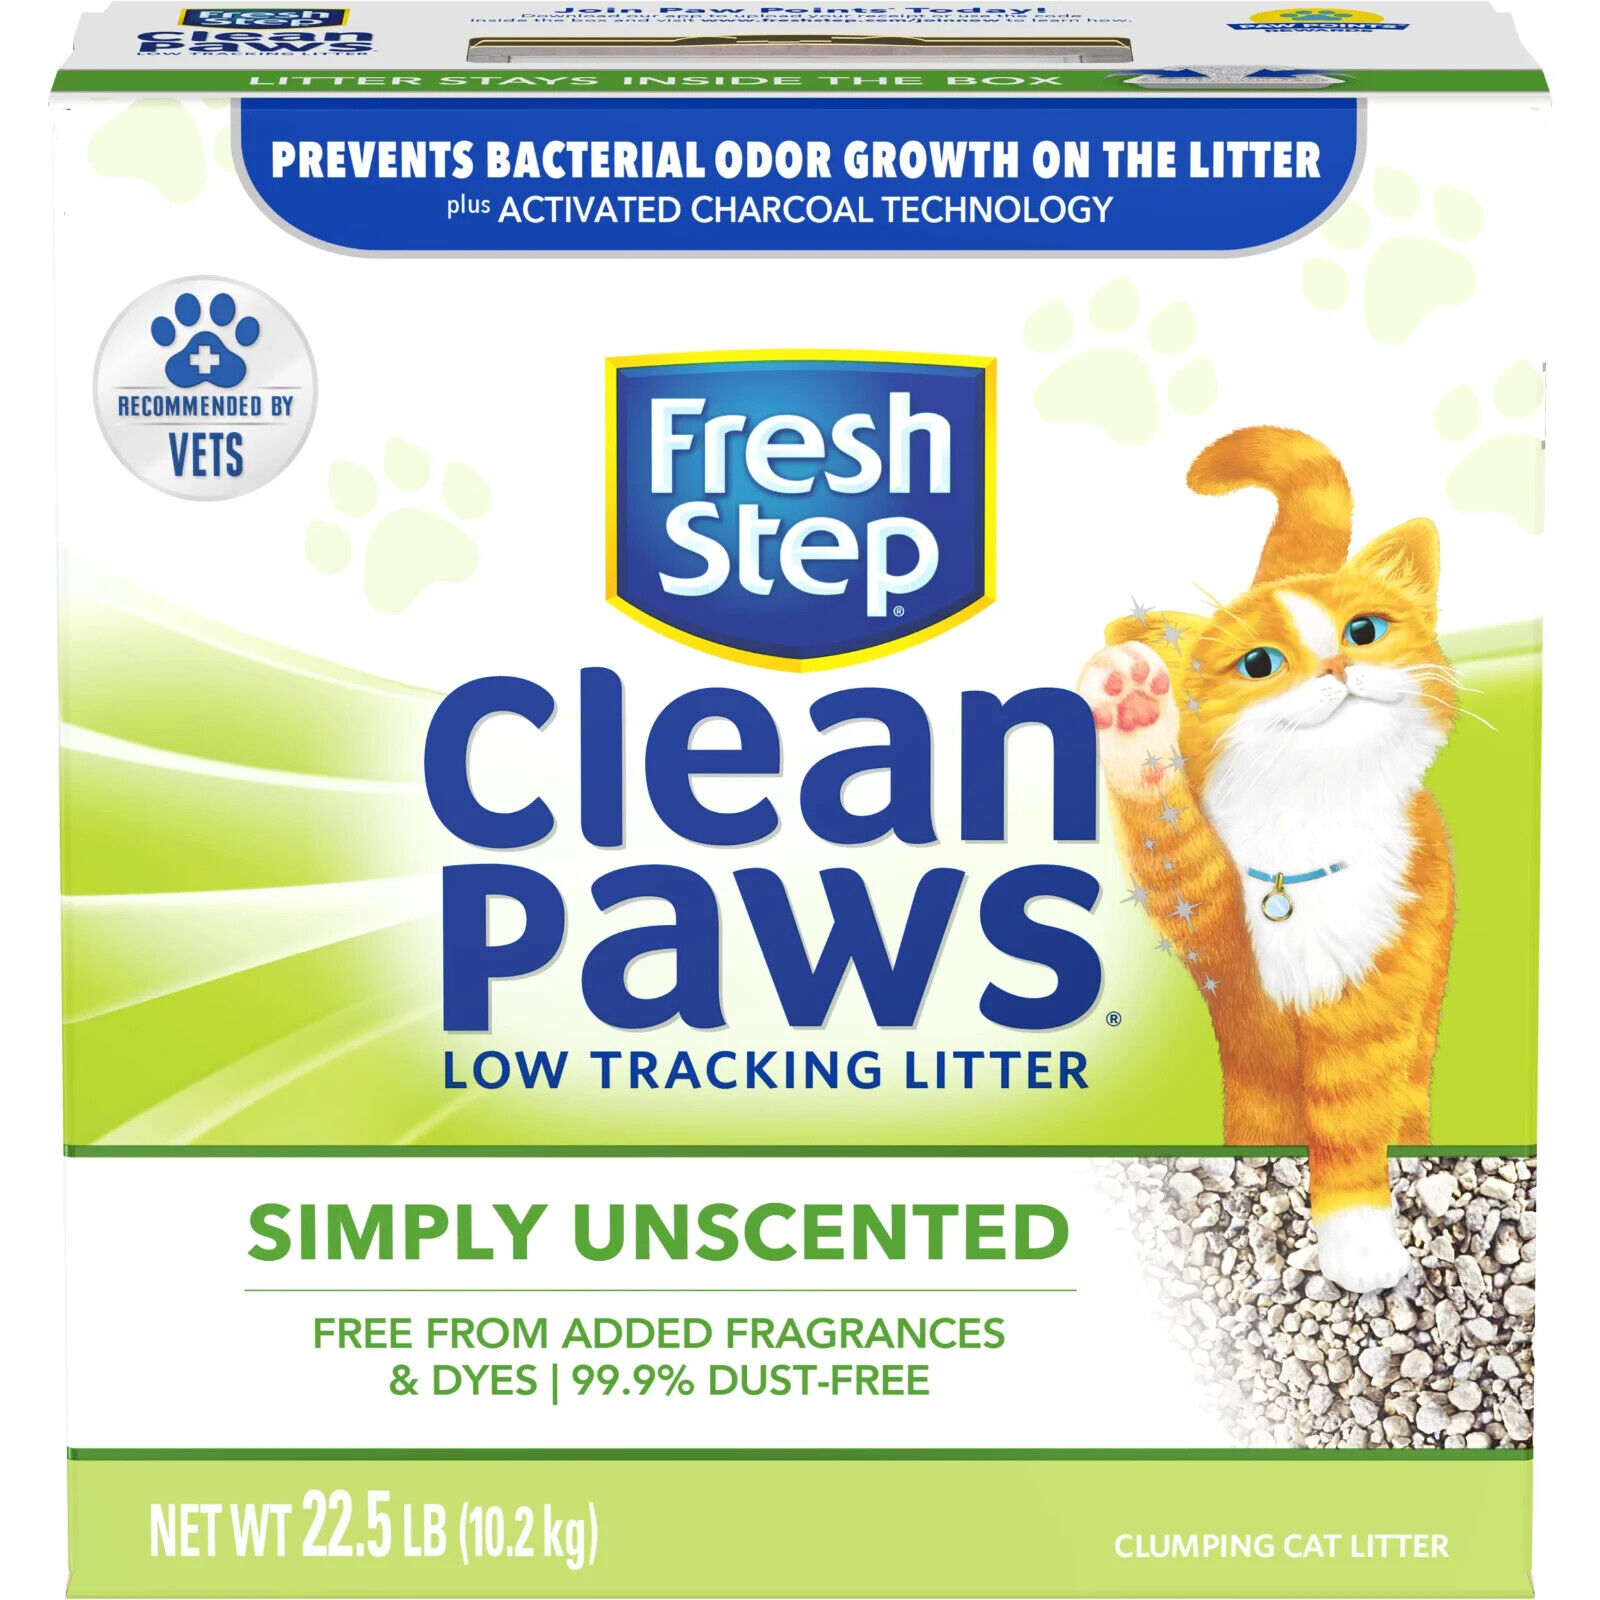 Fresh Step Clean Paws Unscented Clumping Cat Litter 22.5 lb Fresh stock